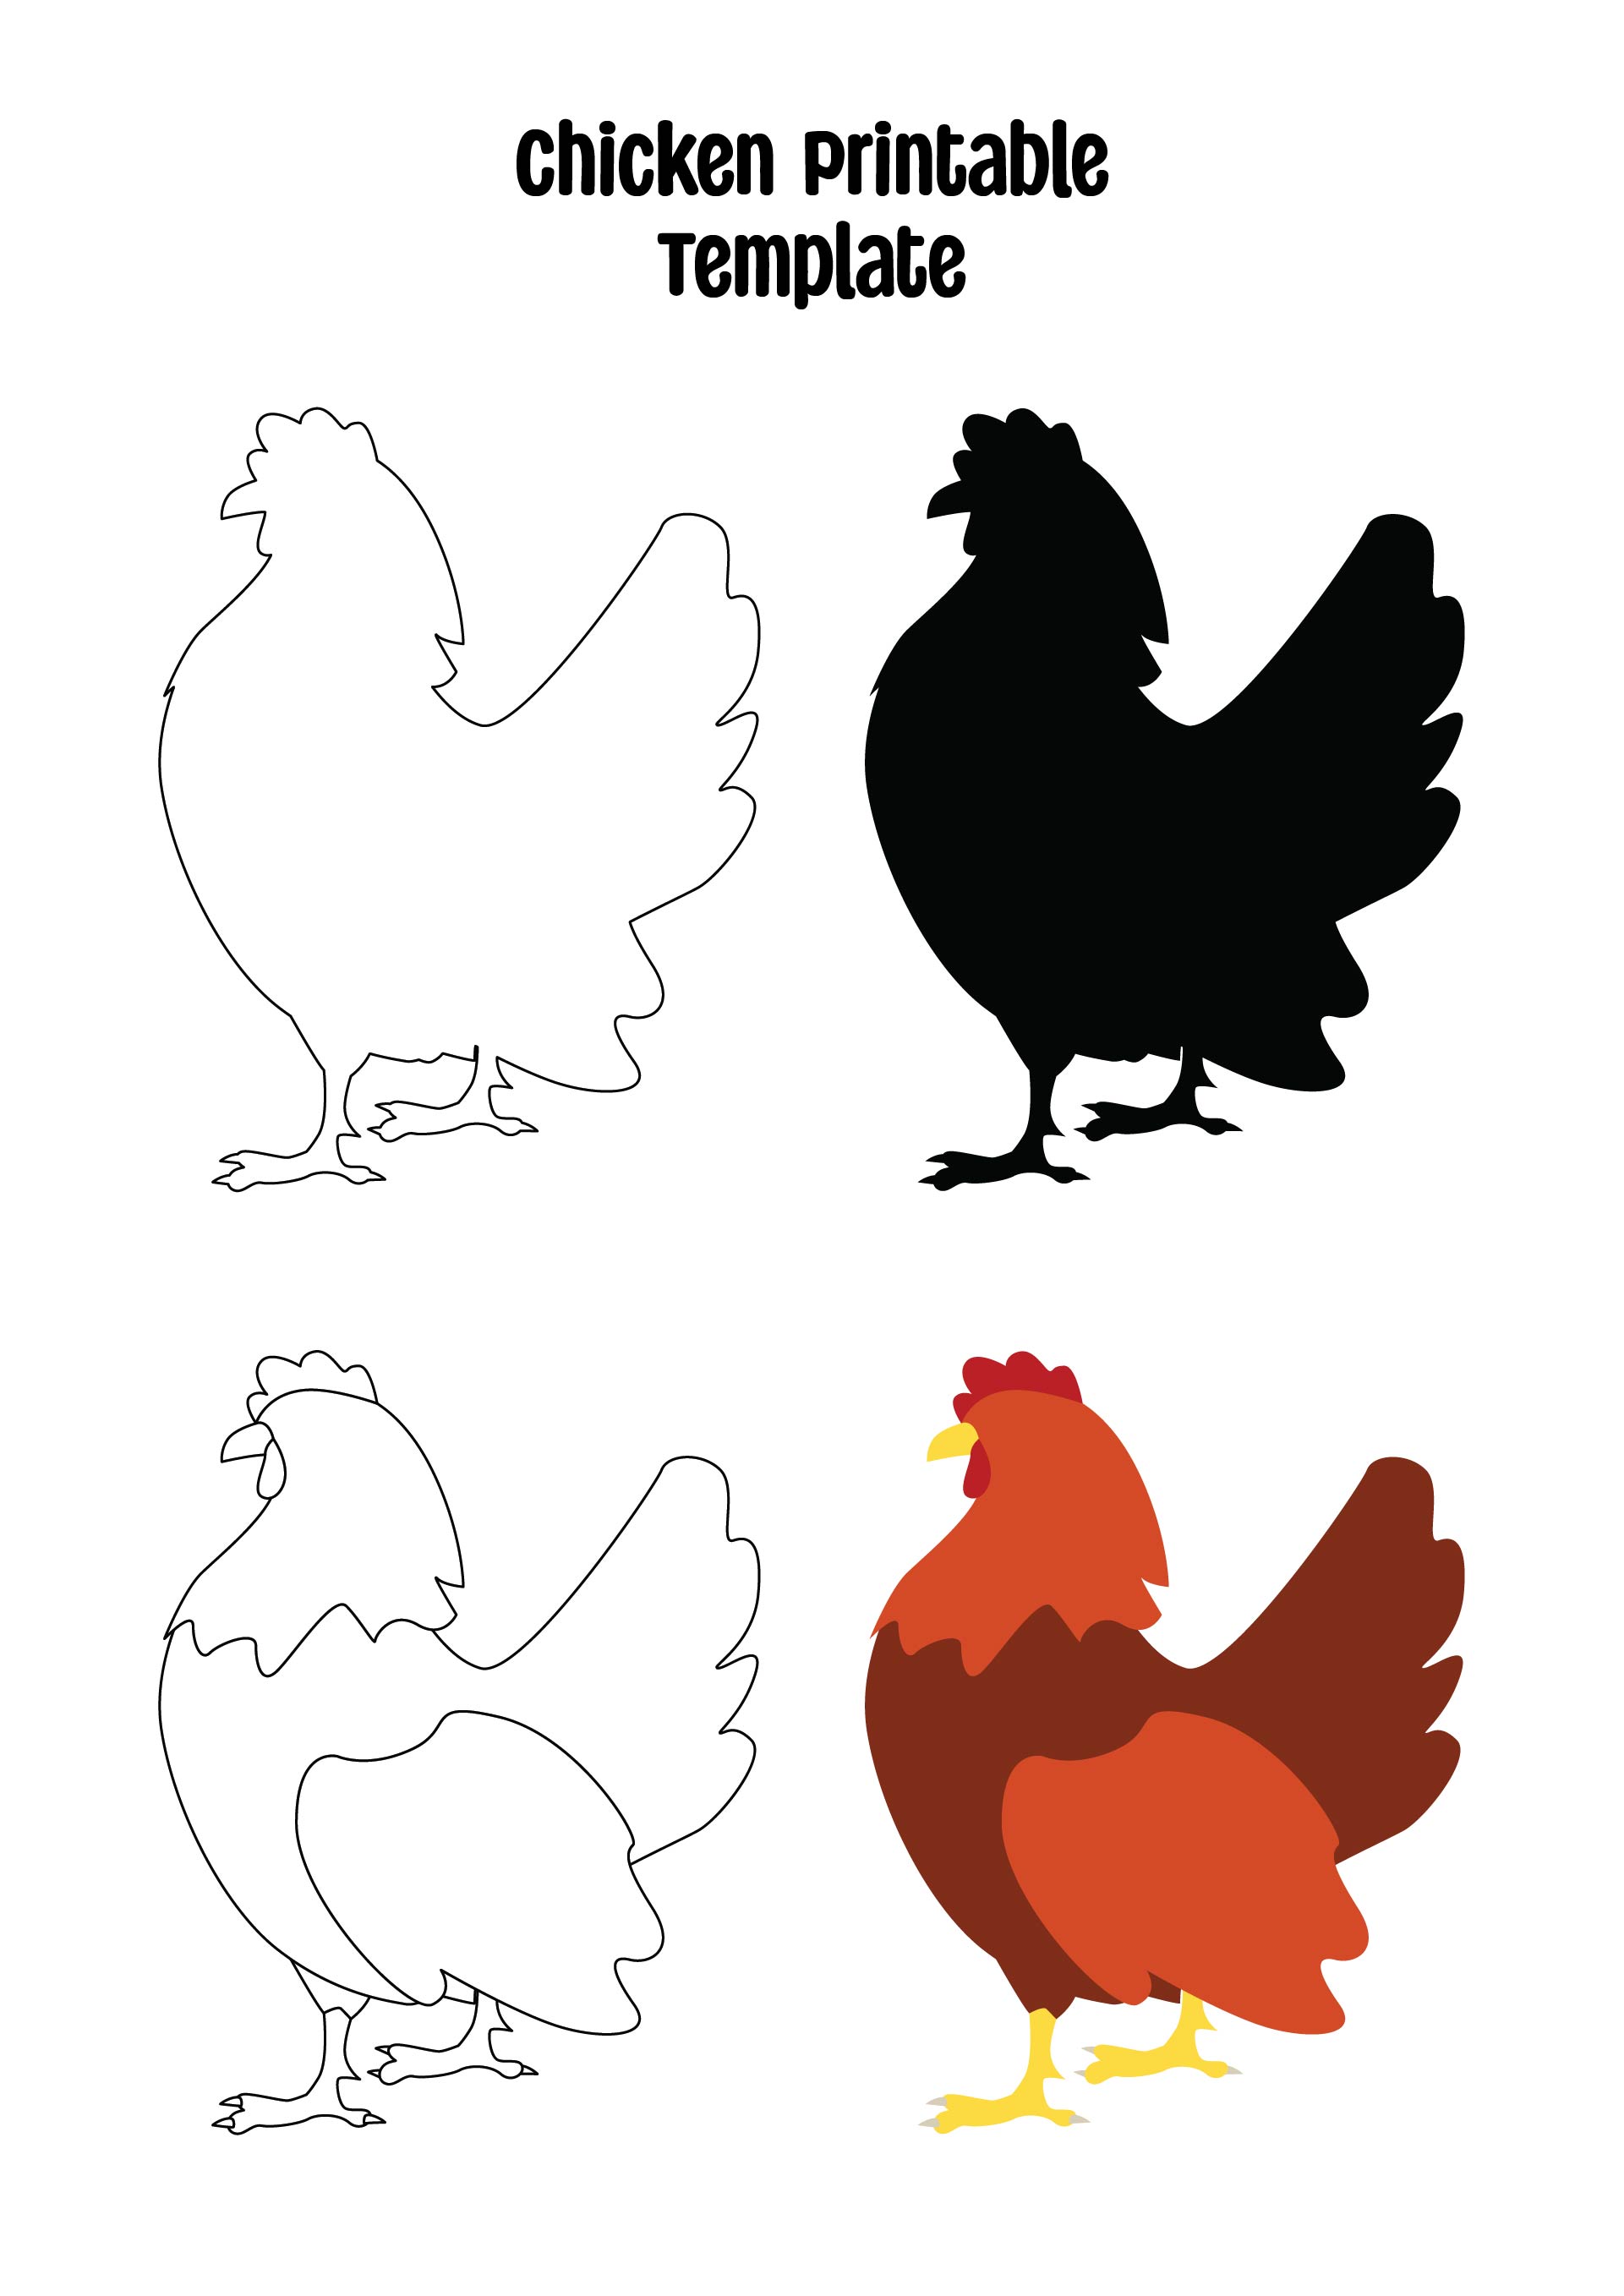 Chicken Printable Template